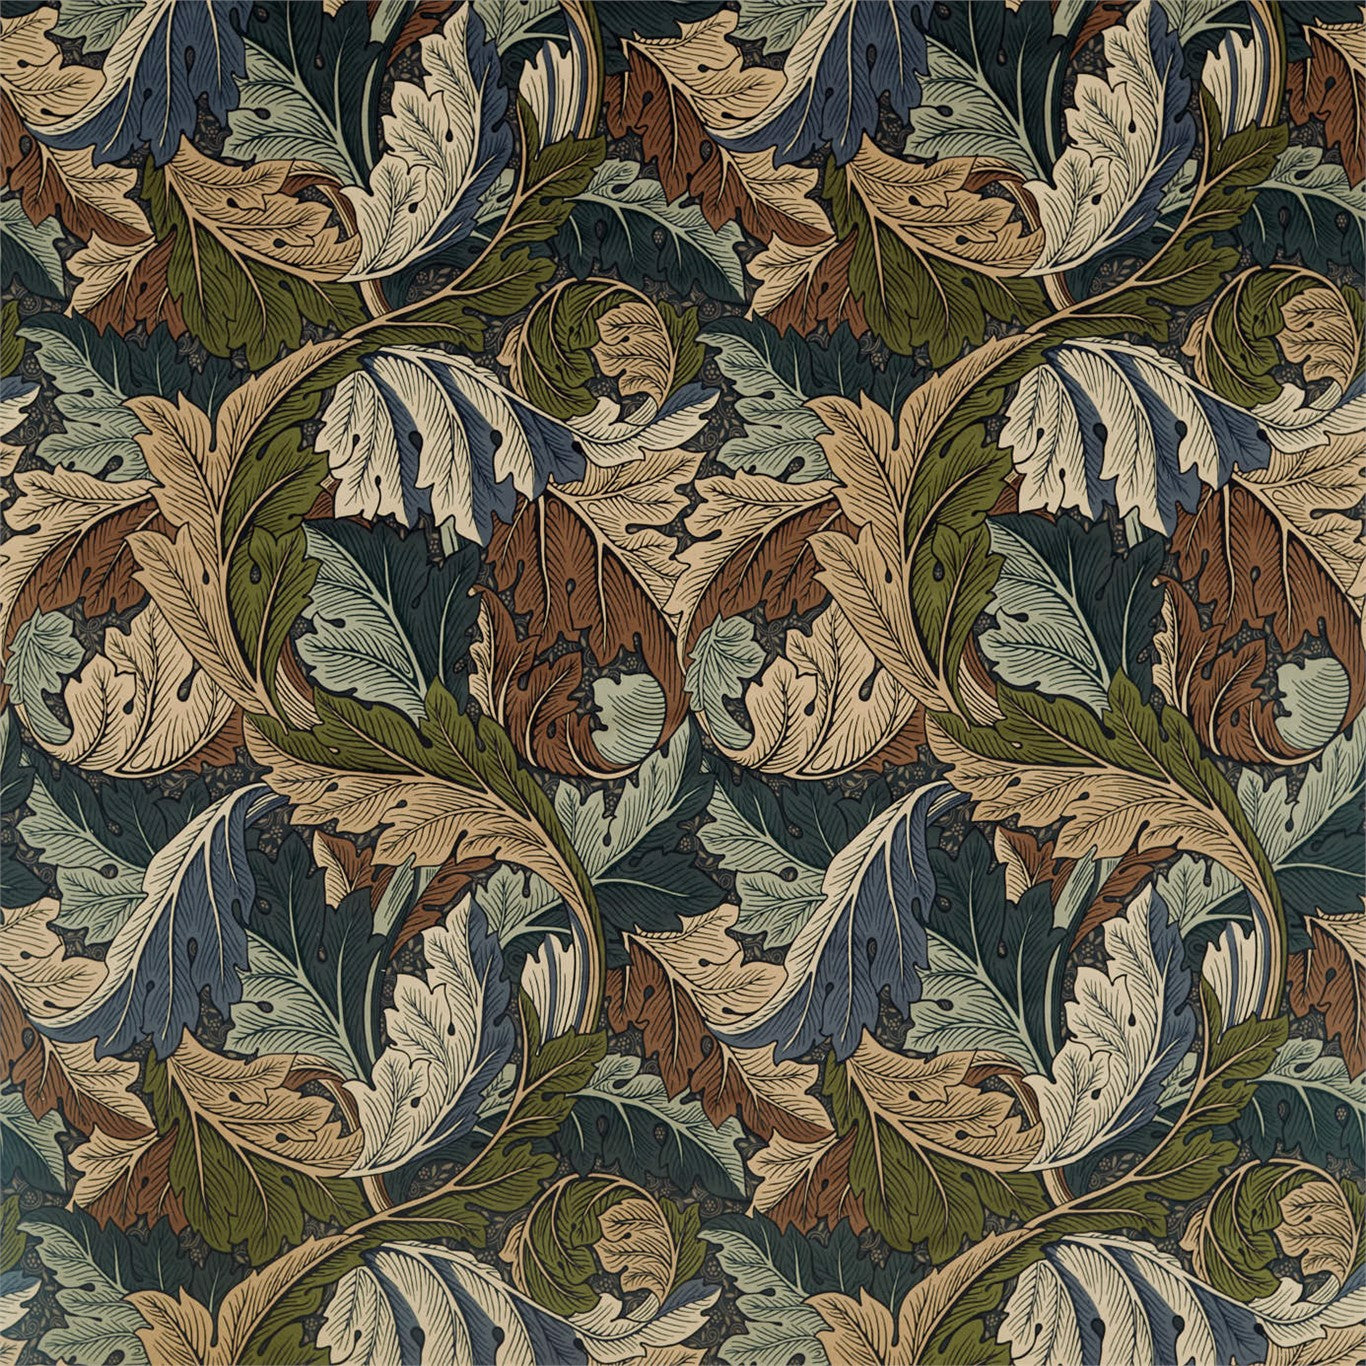 Acanthus Fabric by Morris & Co. - DMA4226401 - Slate Blue/Thyme